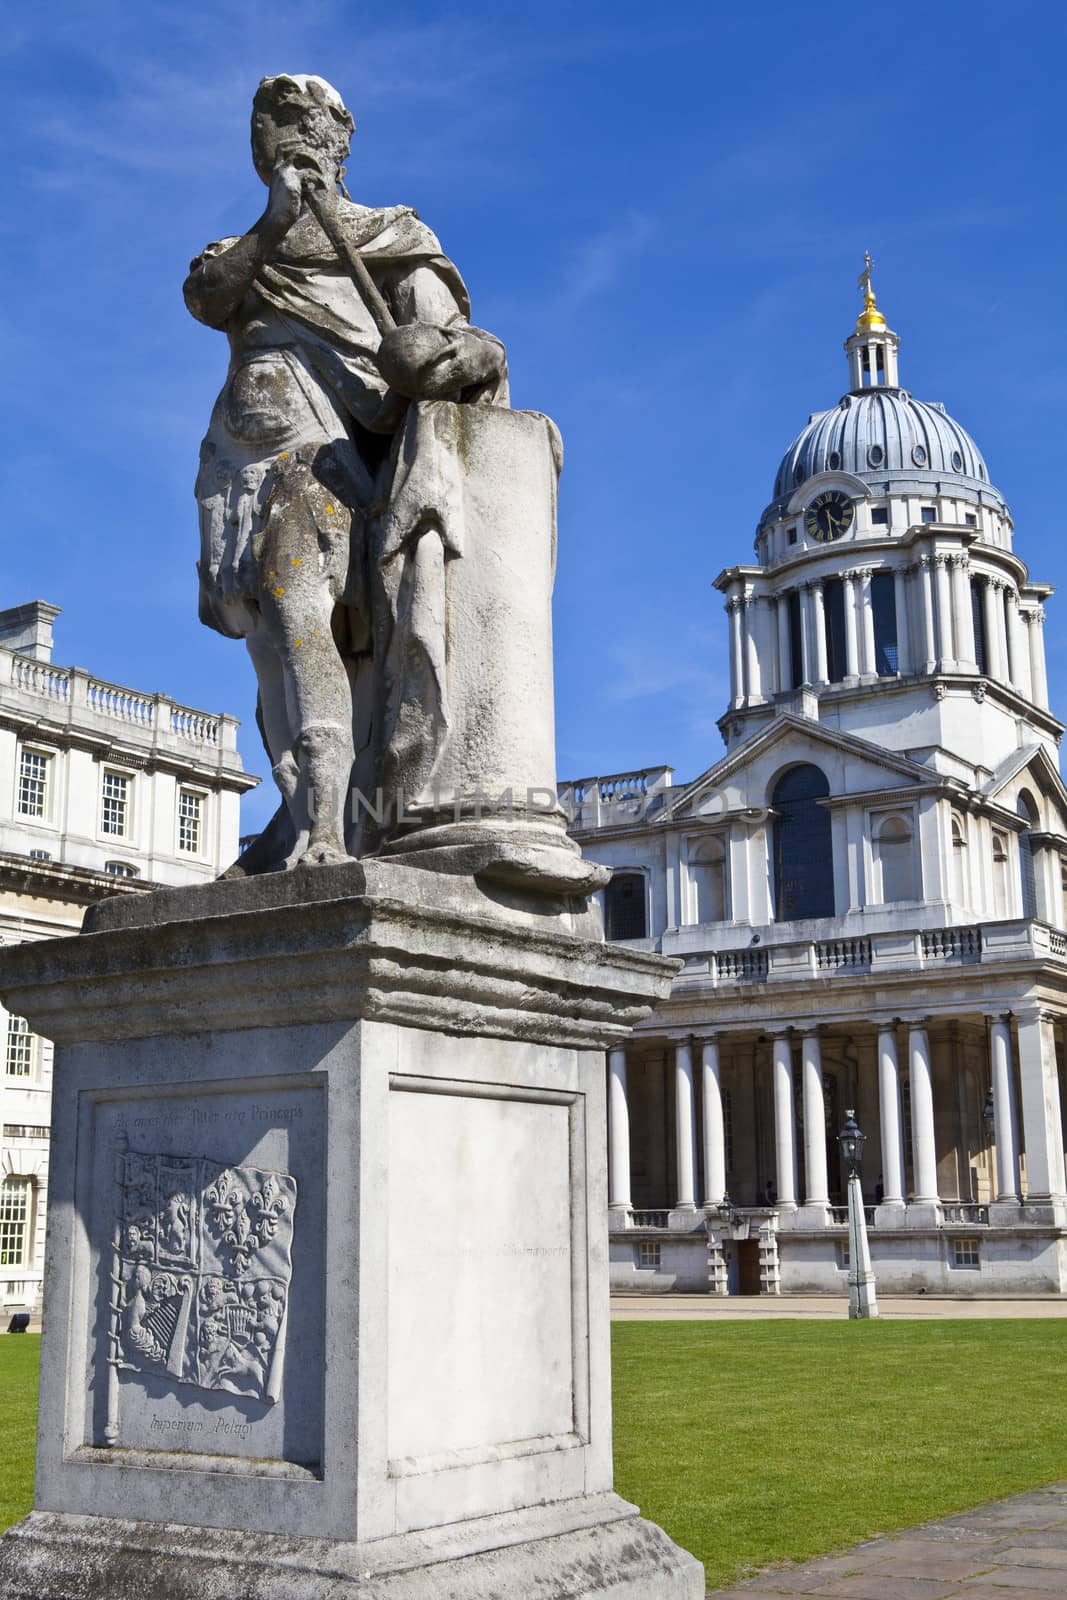 King George II statue and the architecture of Queen Mary Court at the Royal Naval College in Greenwich, London.